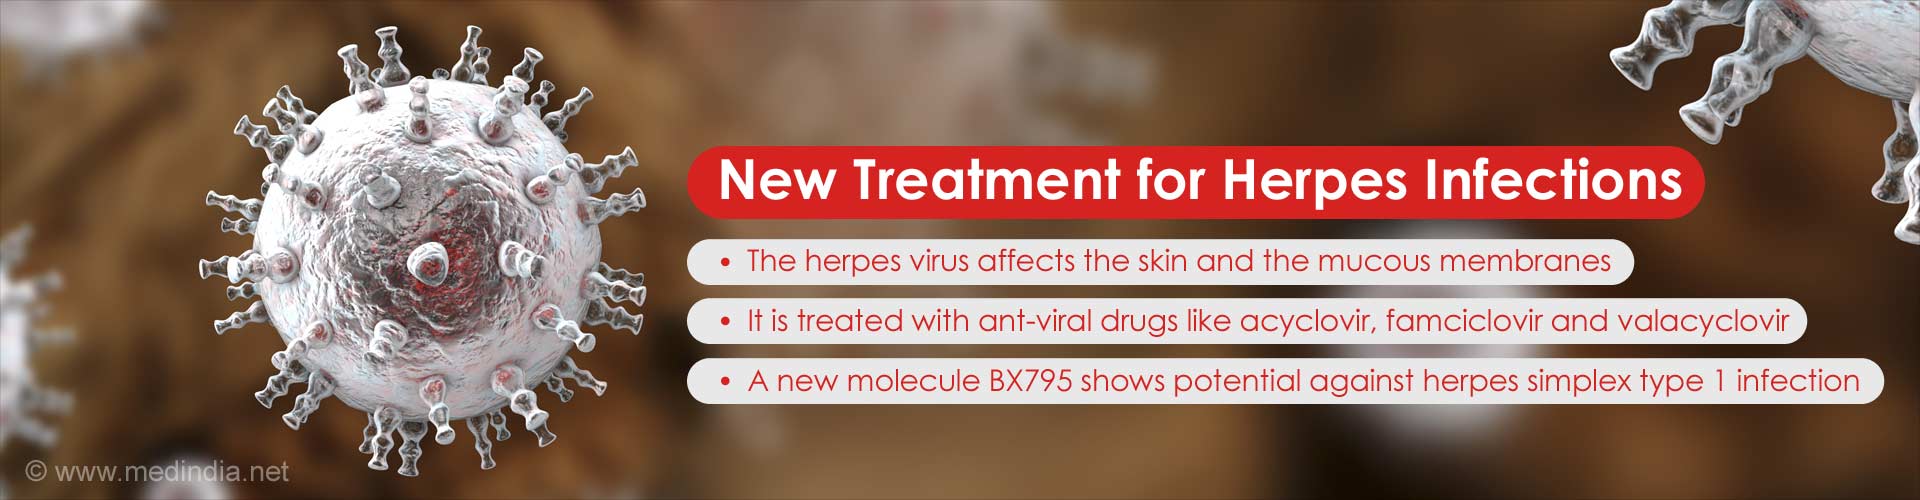 new treatment for herpes infections
- the herpes virus affects the skin and the mucous membranes
- it is treated with anti-virus drugs like acyclovir, famciclovir and valacyclovir
- a new molecule BX795 shows potential against herpes simplex type 1 infection
